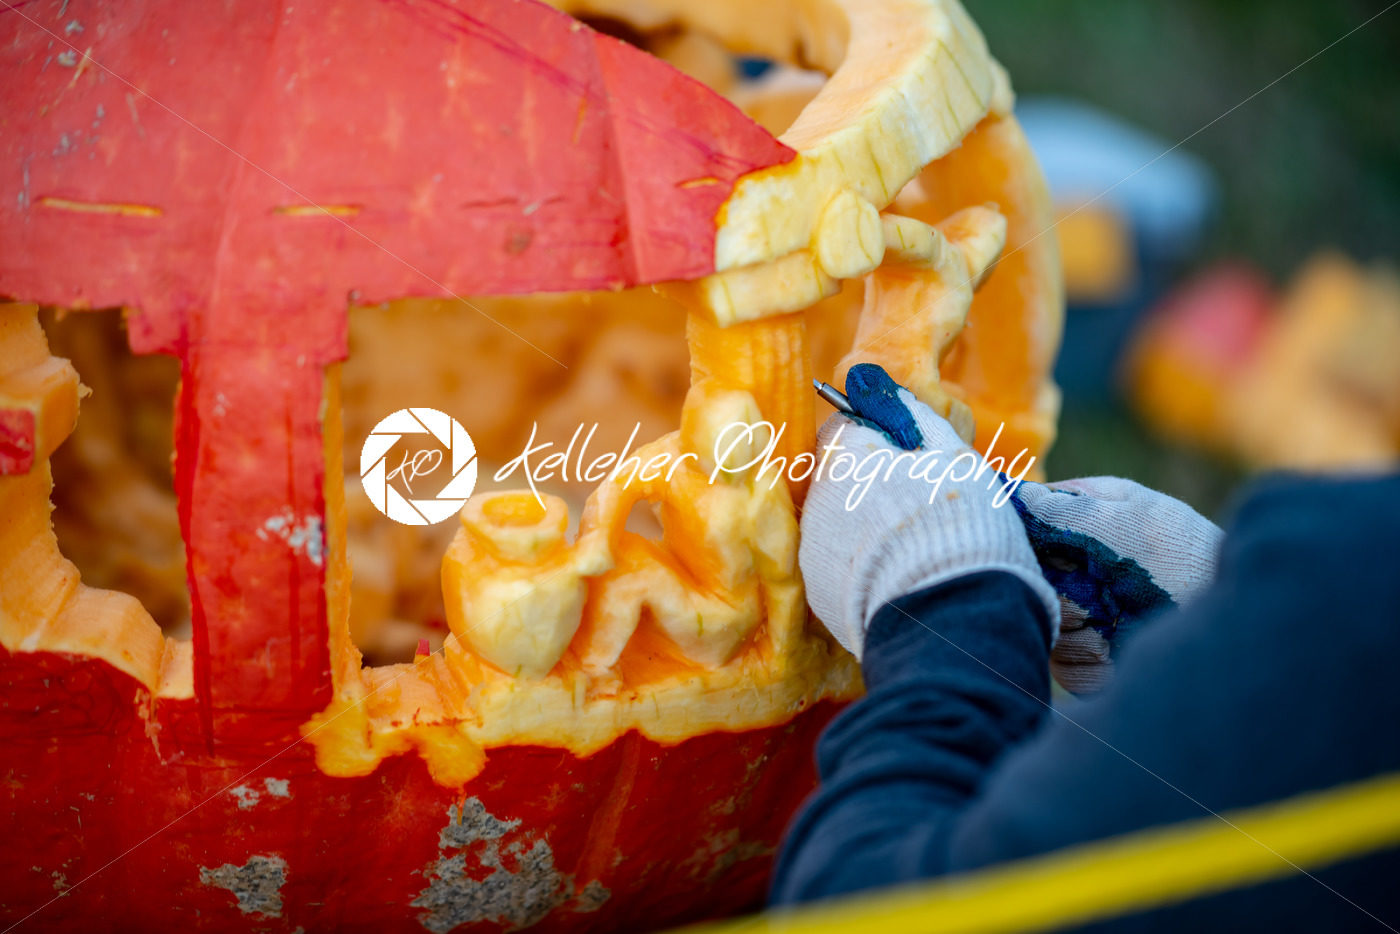 CHADDS FORD, PA – OCTOBER 18: Person carving pumpkin at The Great Pumpkin Carve carving contest on October 18, 2018 - Kelleher Photography Store